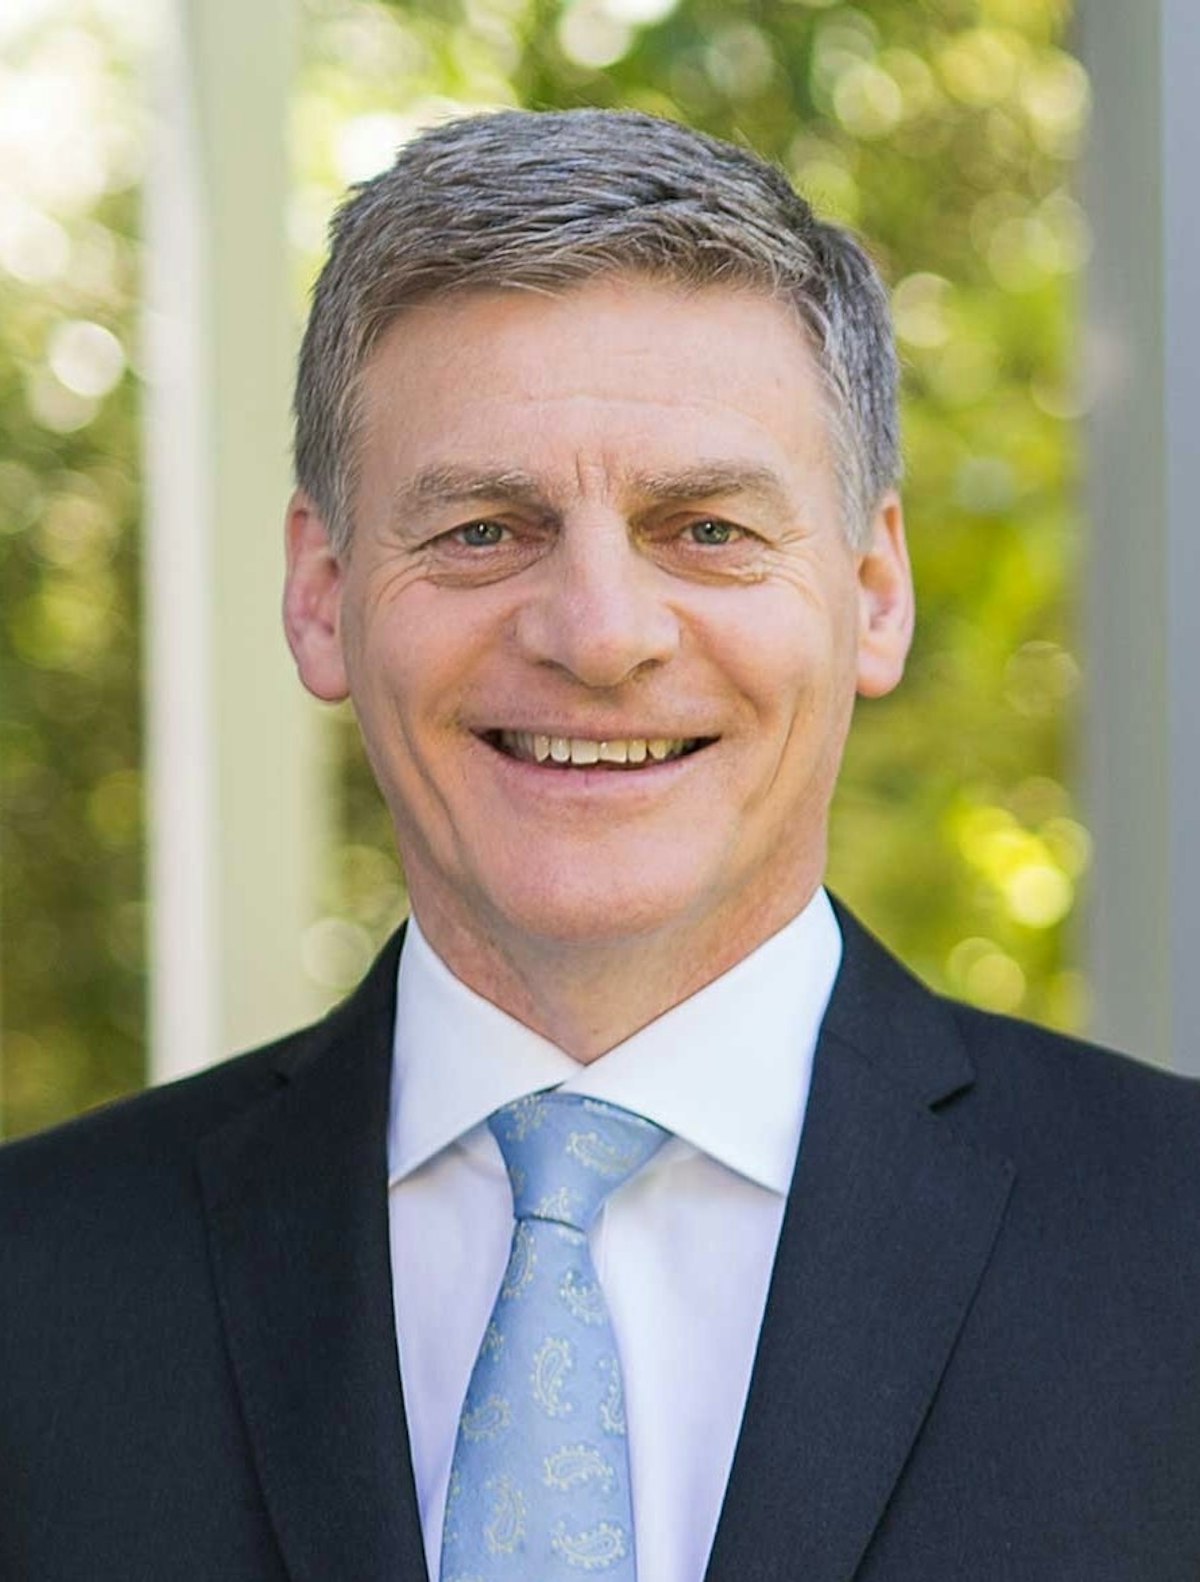 New Zealand Prime Minister Bill English addressed a message to the Baha'i community for the occasion of the bicentenary of the birth of Baha'u'llah.